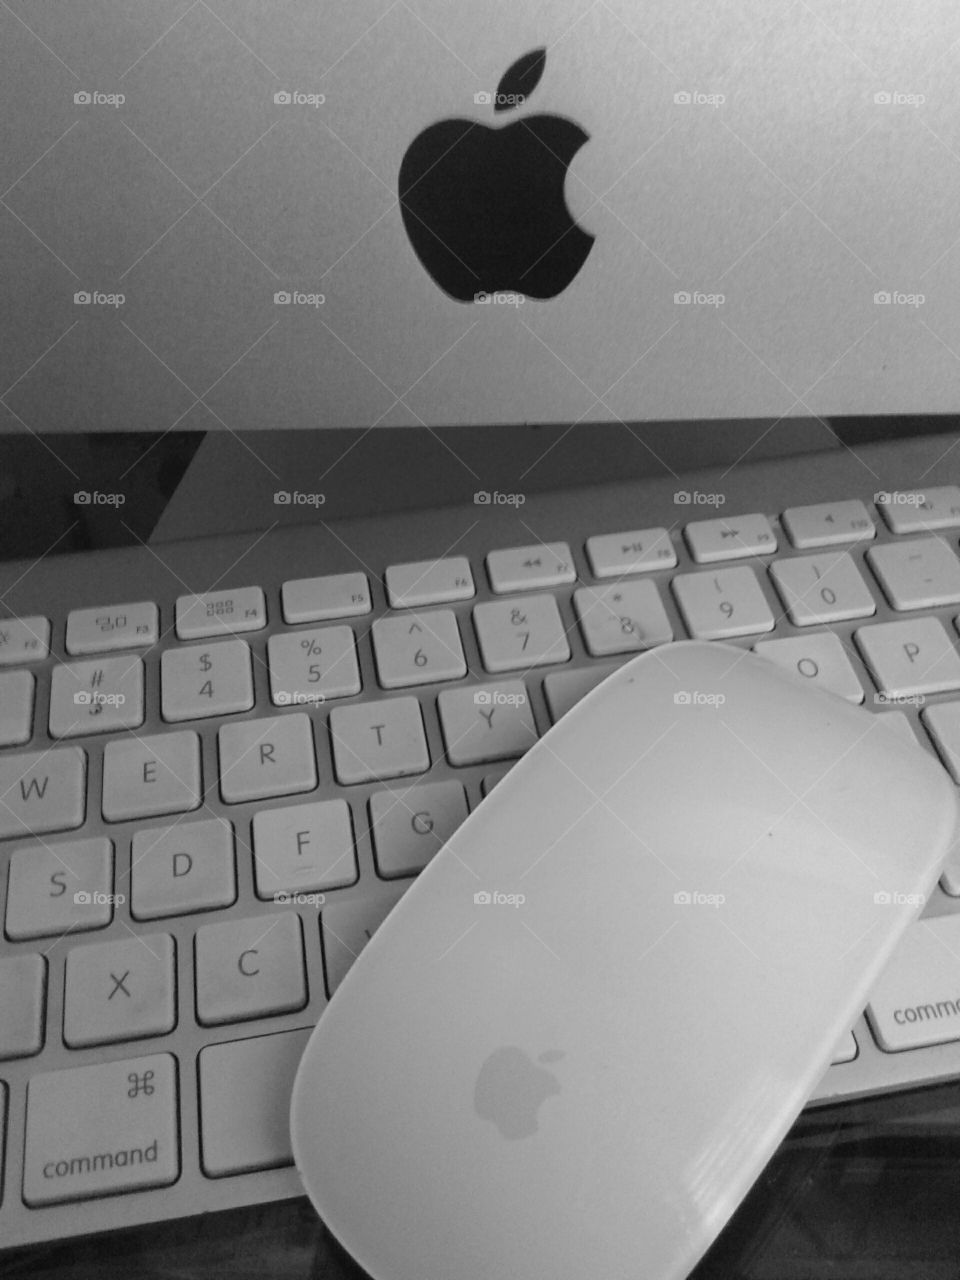 Mac OS X and keyboard, mouse